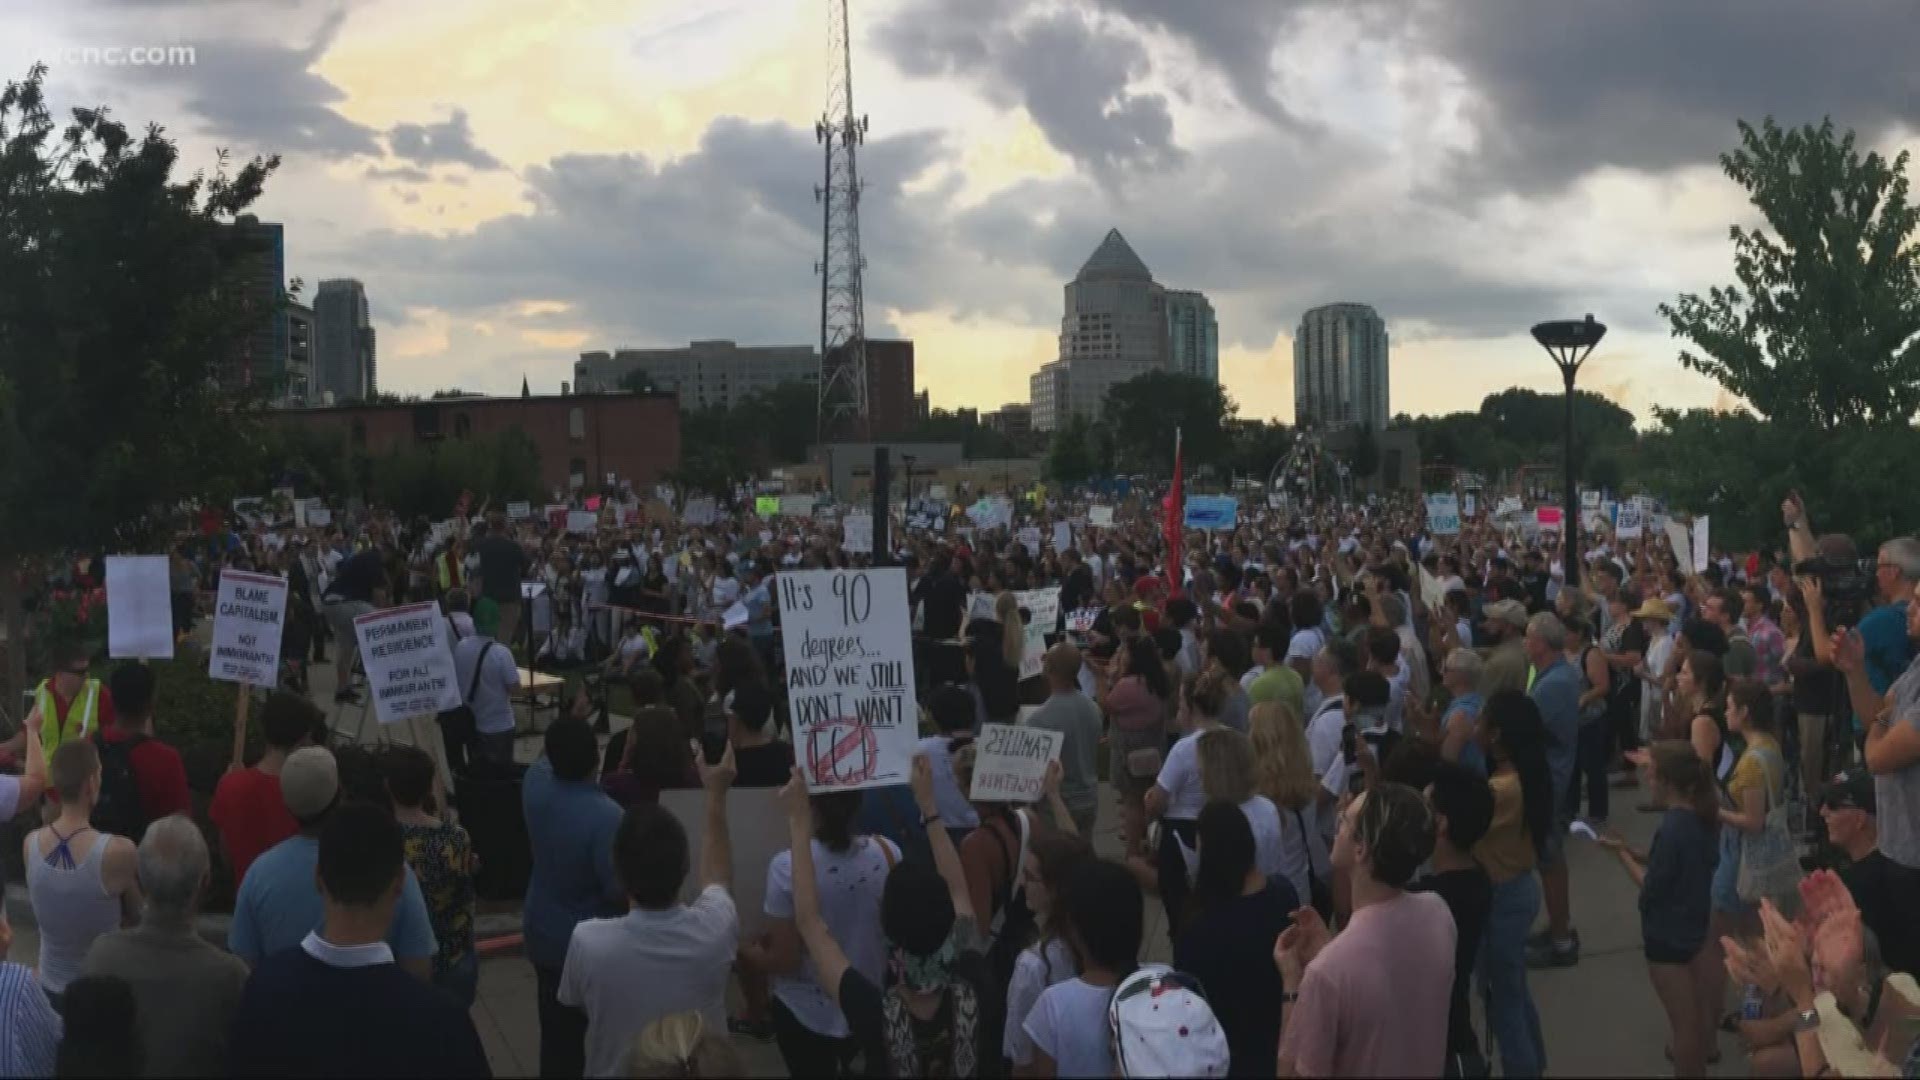 Thousands gathered in uptown Charlotte Saturday night to show support of migrant families separated at the border.